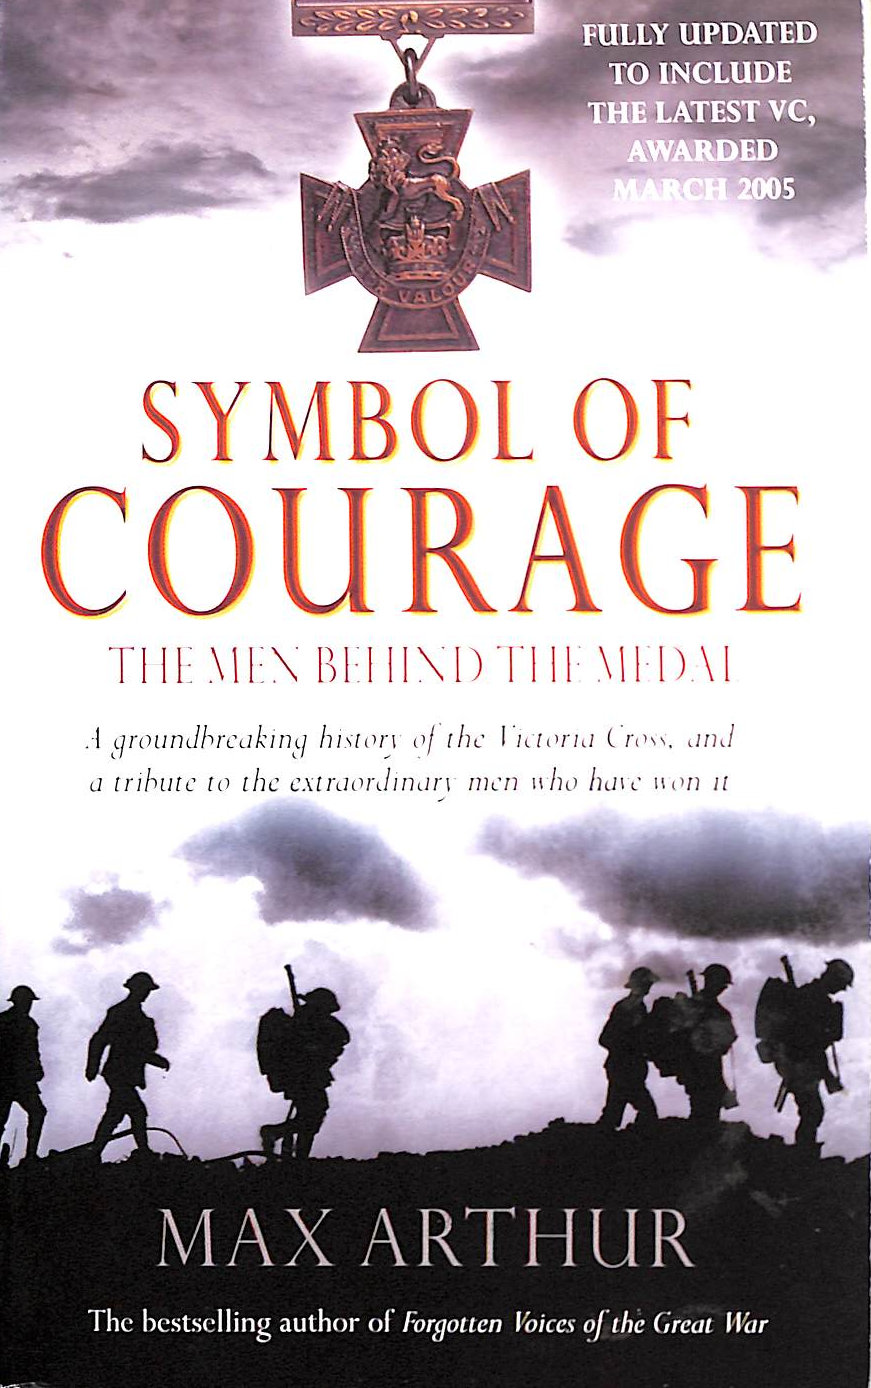 ARTHUR, MAX - Symbol of Courage Signed Edition